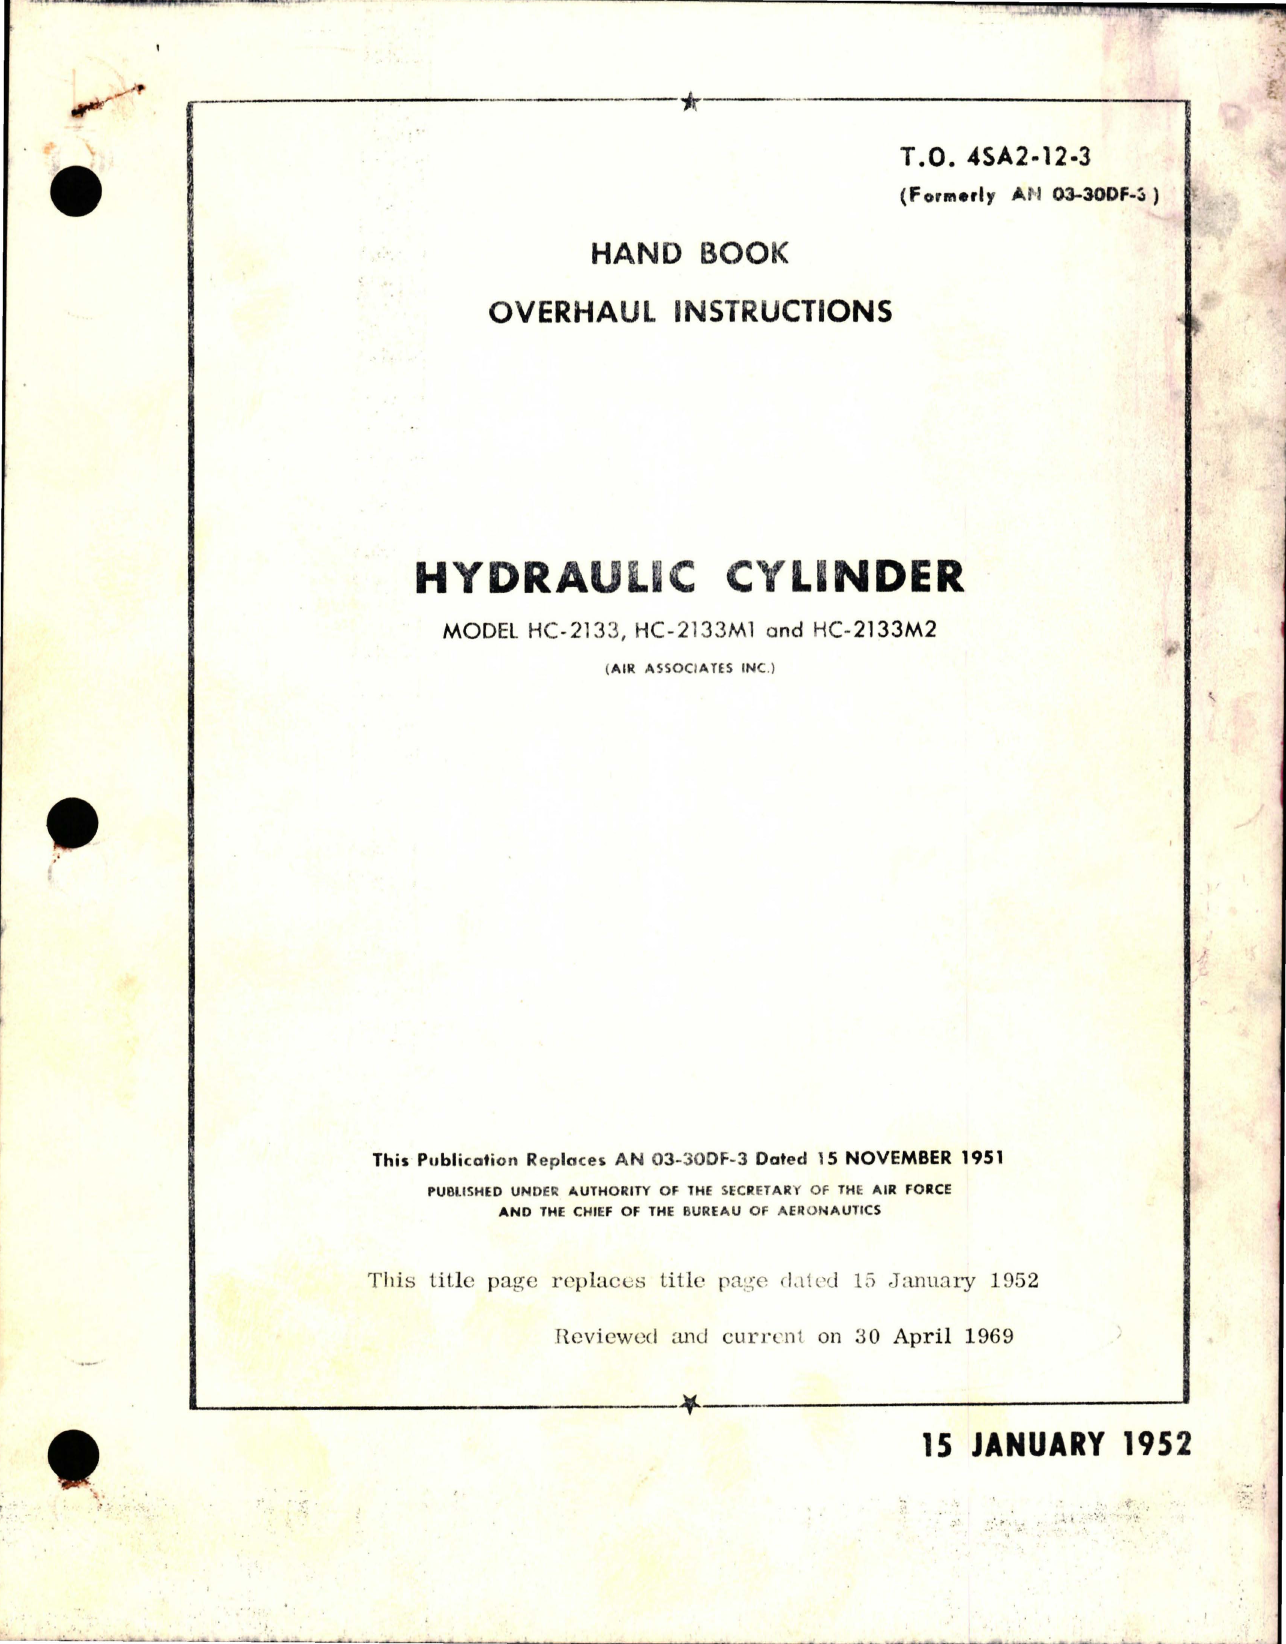 Sample page 1 from AirCorps Library document: Overhaul Instructions for Hydraulic Cylinder - Models HC-2133, HC-2133M1, and HC-2133M2